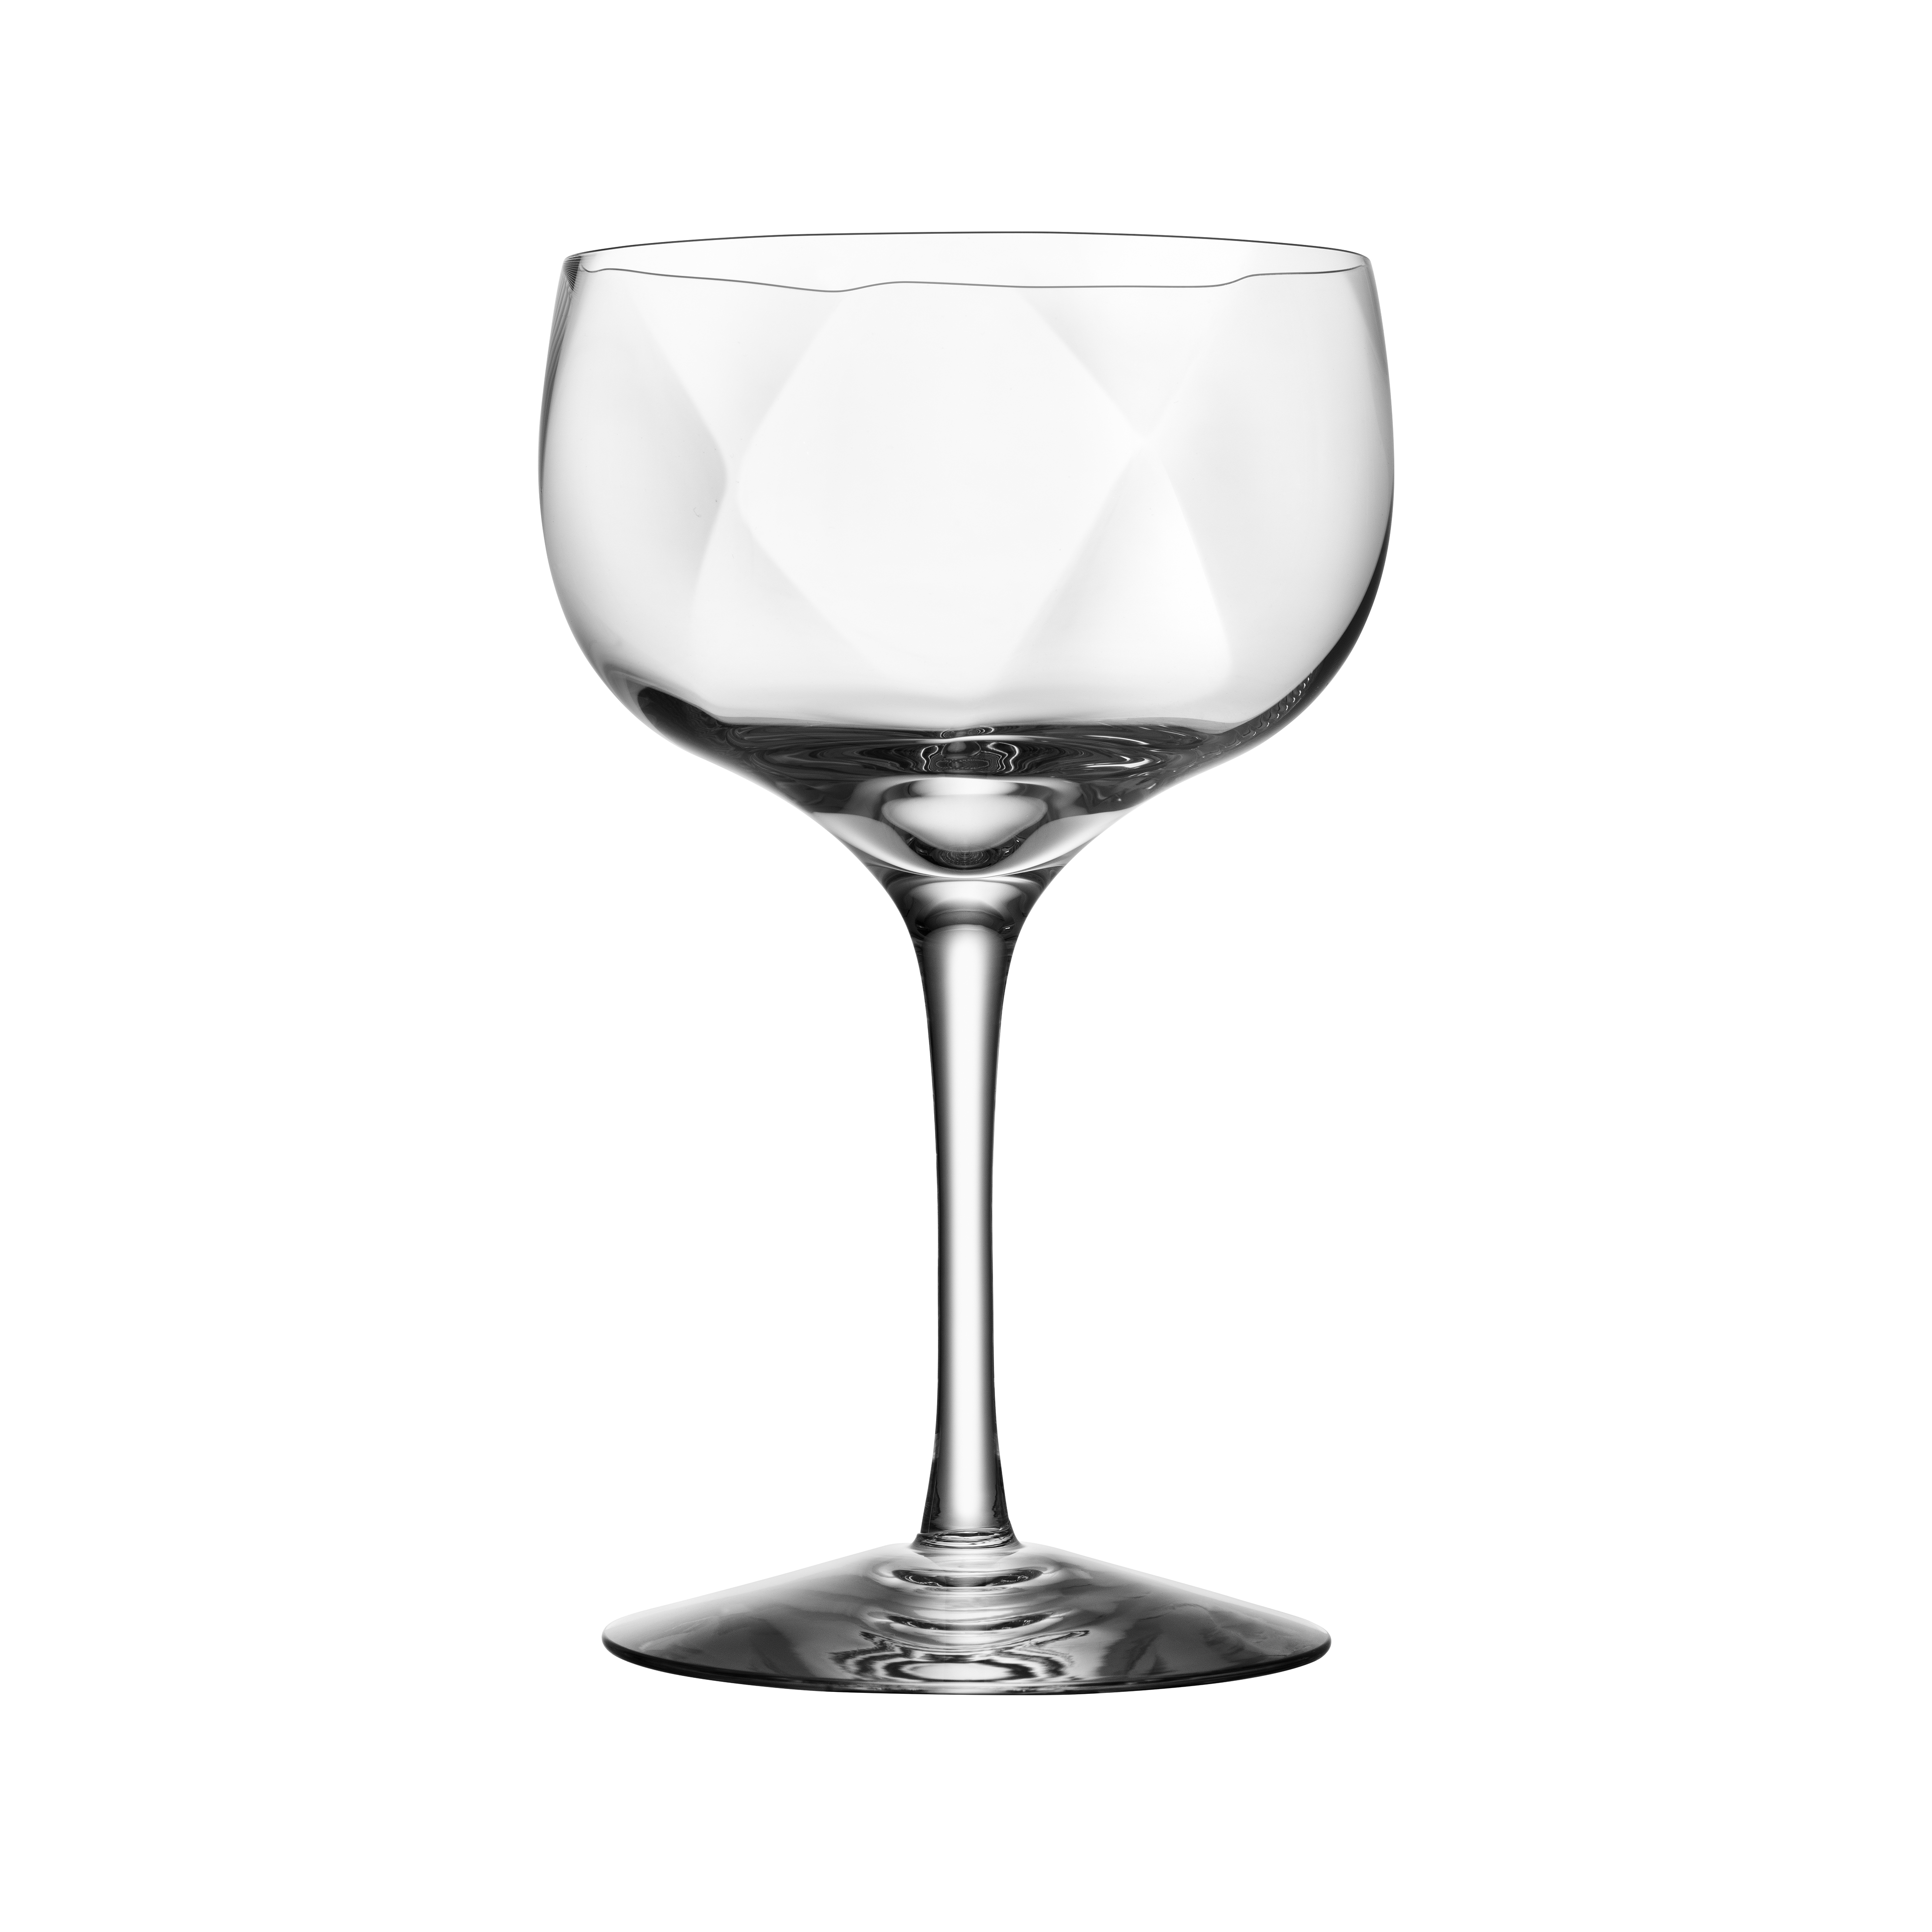 https://www.nordicnest.com/assets/blobs/kosta-boda-chateau-coupe-glass-35-cl-clear/501779-01_1_ProductImageMain-75ef75c278.jpg